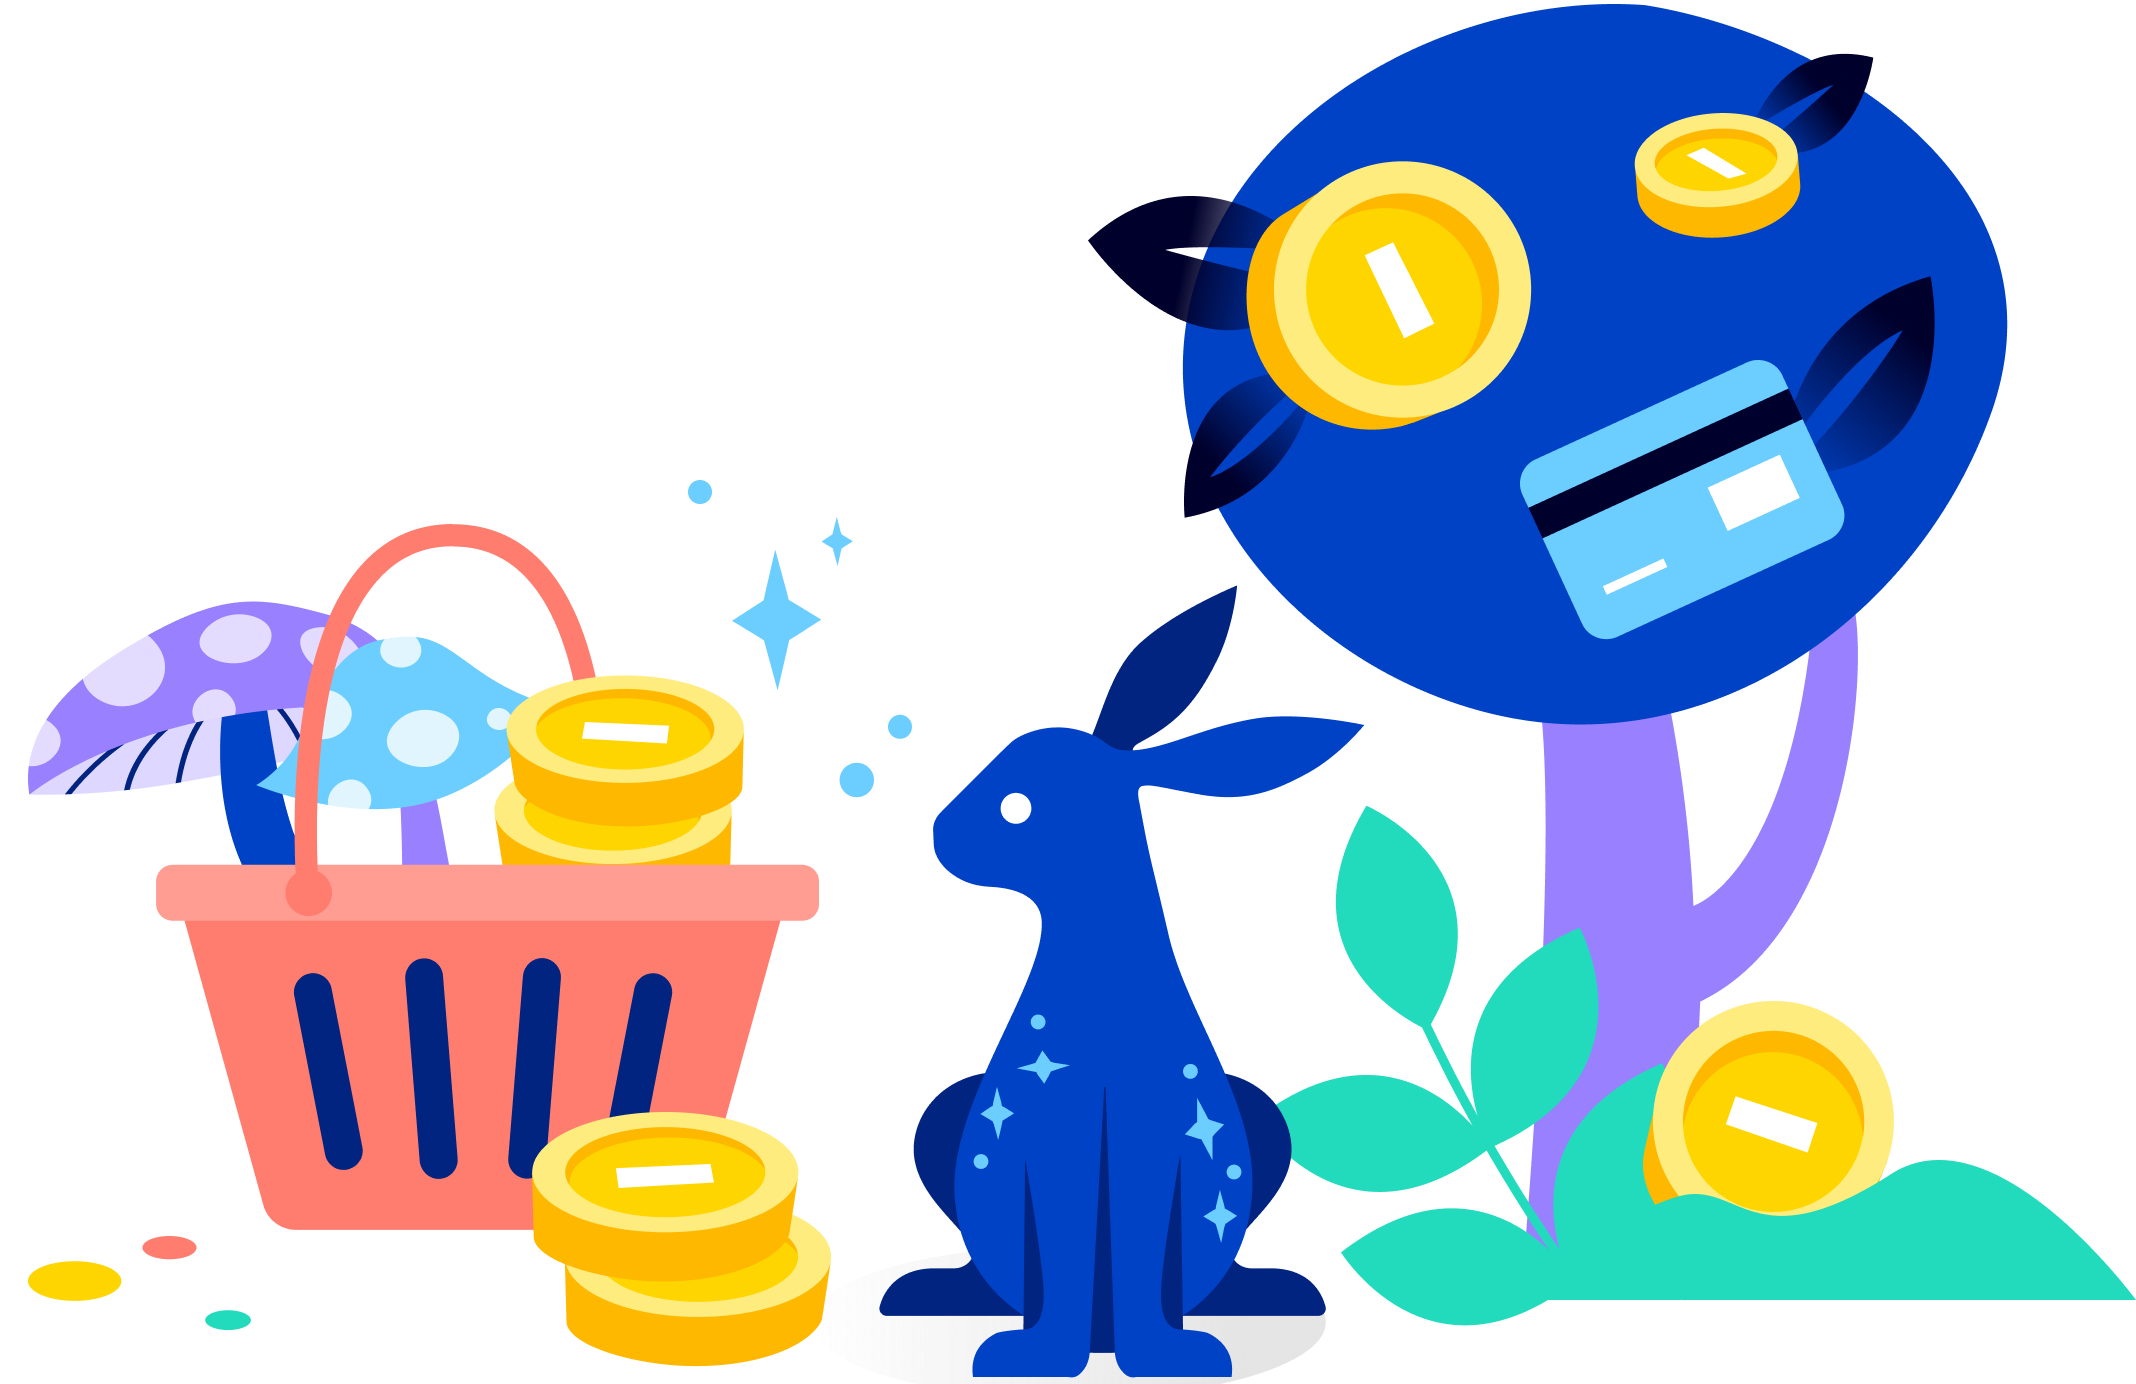 An illustrated image of Ziggy crouched between a full shopping cart and a tree with various forms of currency on it